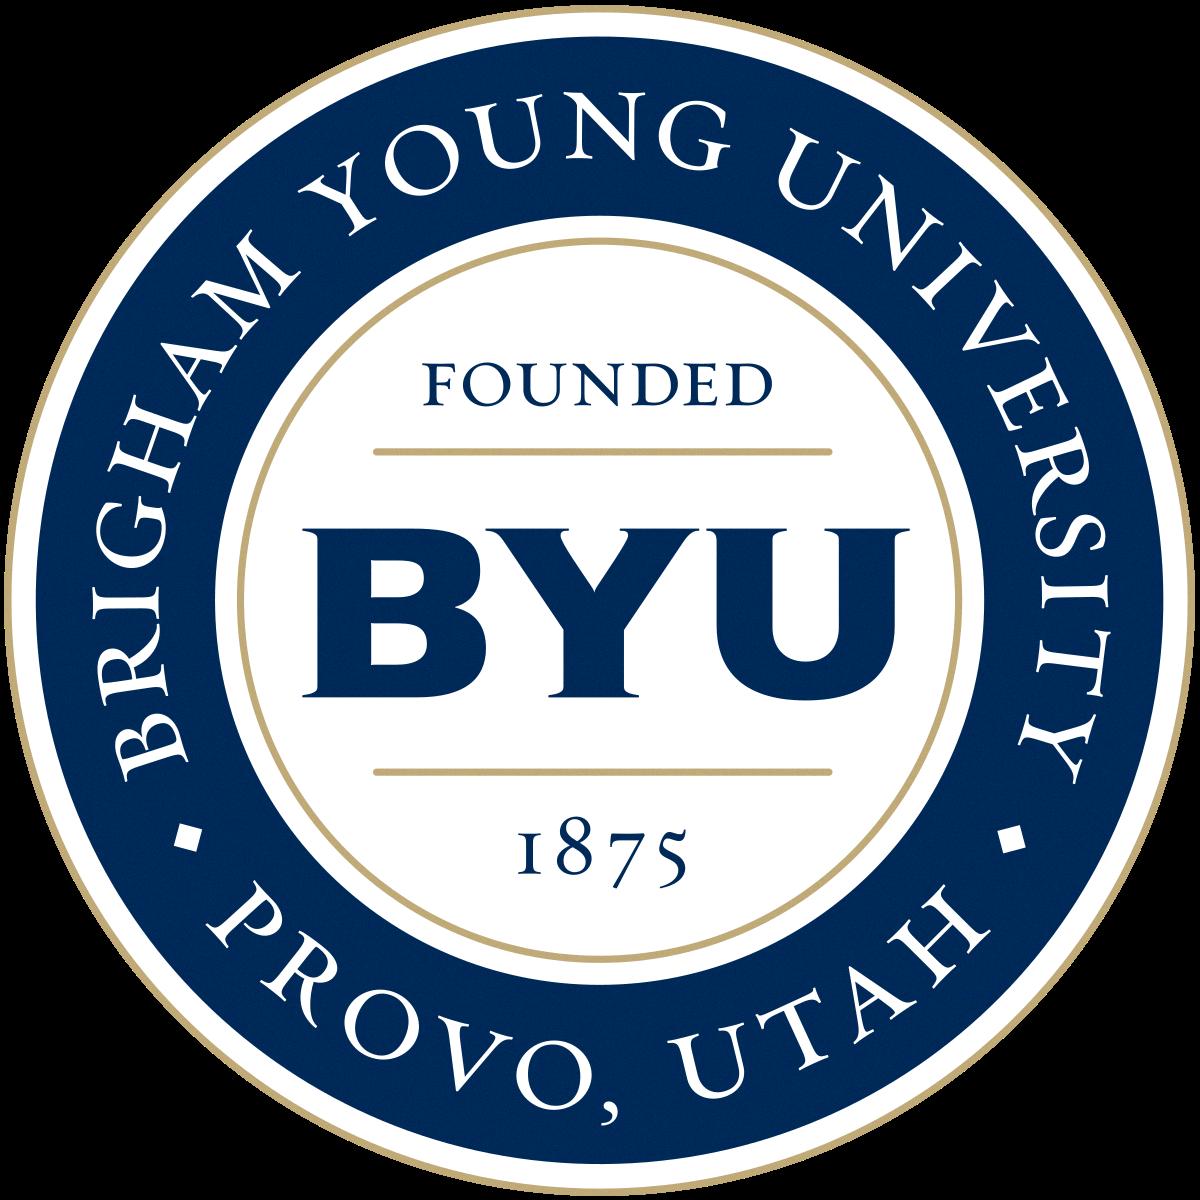 do you have to be mormon to go to byu